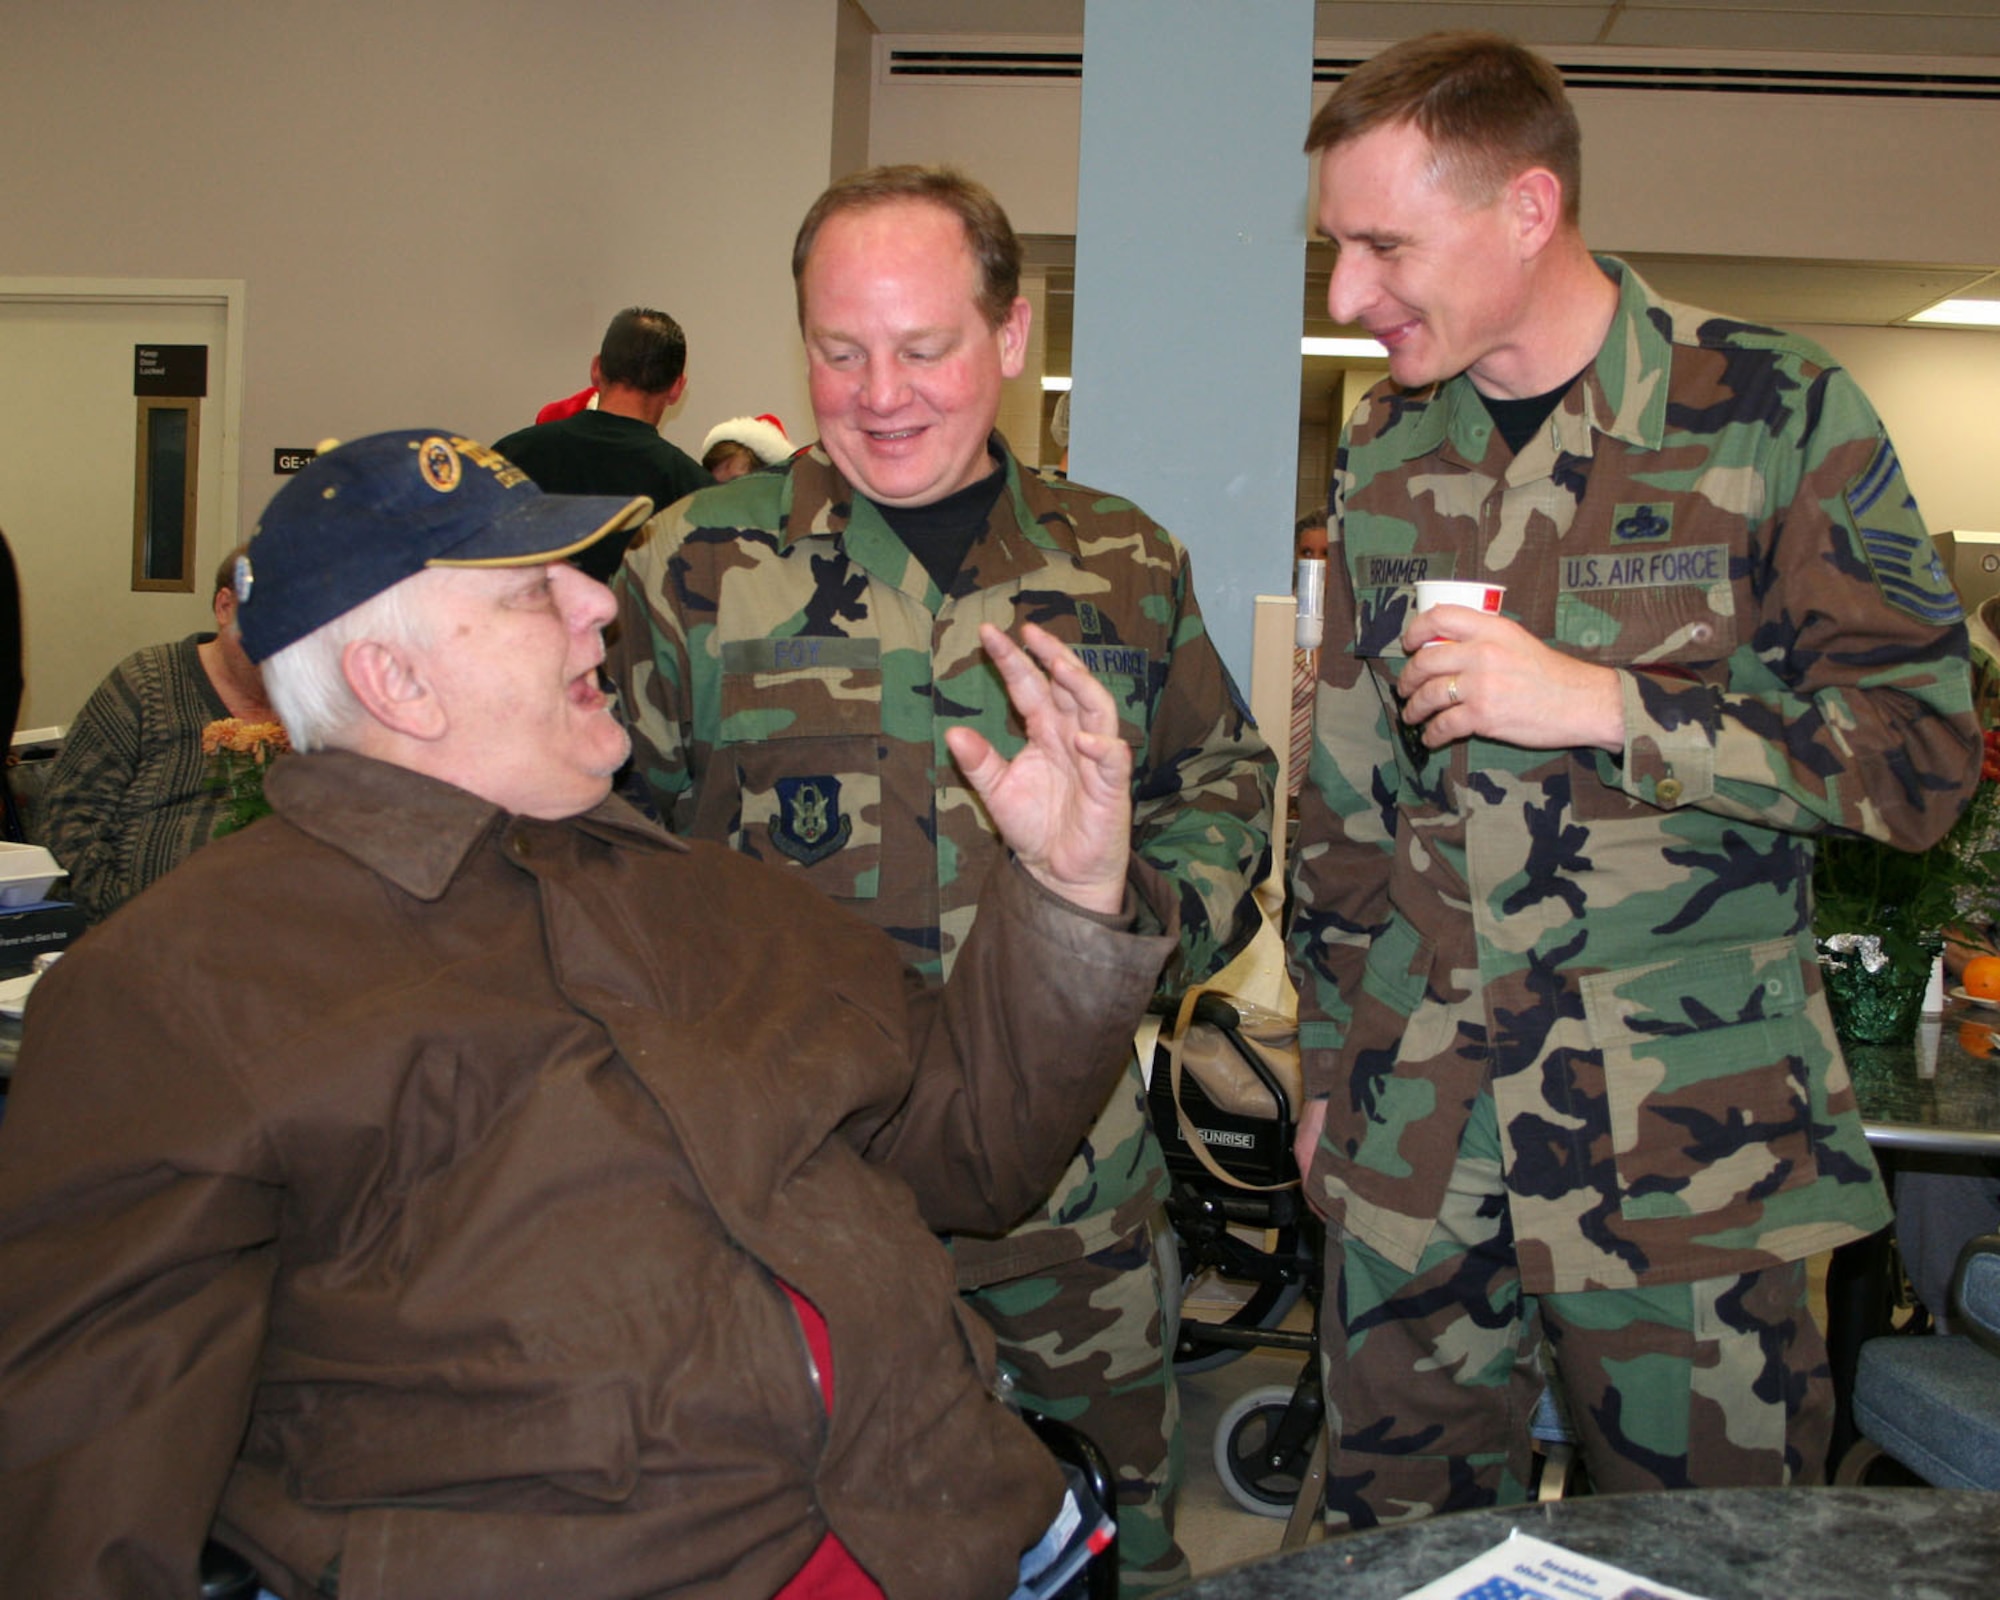 DAYTON, Ohio -- Veteran Walter Shelhorn talks to Master Sgt. Jim Foy (center) and Senior Master Sgt. Mike Brimmer (Left) during a visit at the Dayton Veterans Administration Nursing Home during their annual holiday party. (U.S. Air Force photo/Maj. Jose Cardenas).